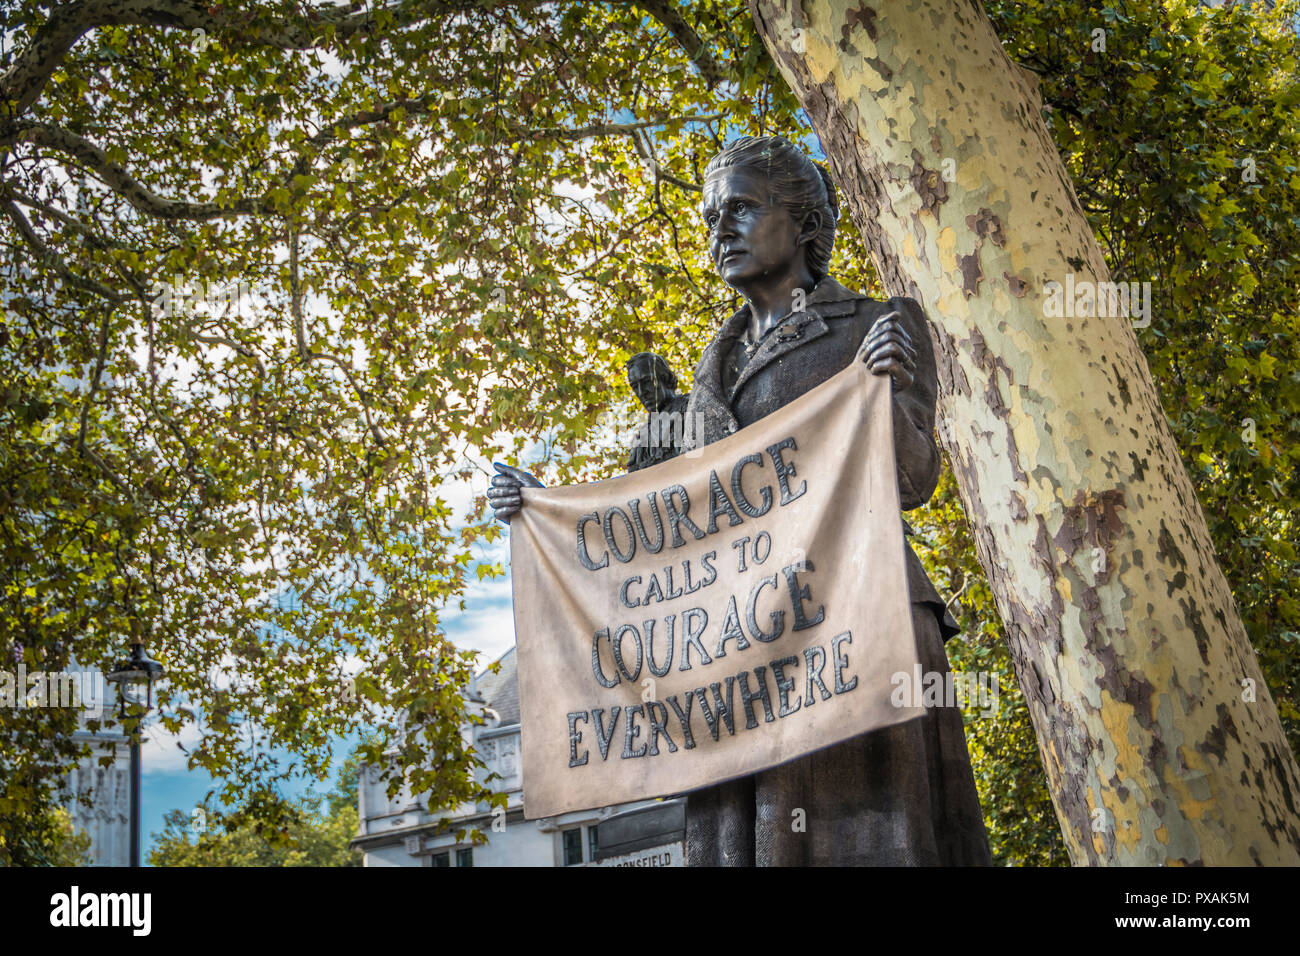 'Courage calls to courage everywhere'  - Gillian Wearing’s bronze statue of Millicent Fawcett in Parliament Square, London, England, U.K. Stock Photo